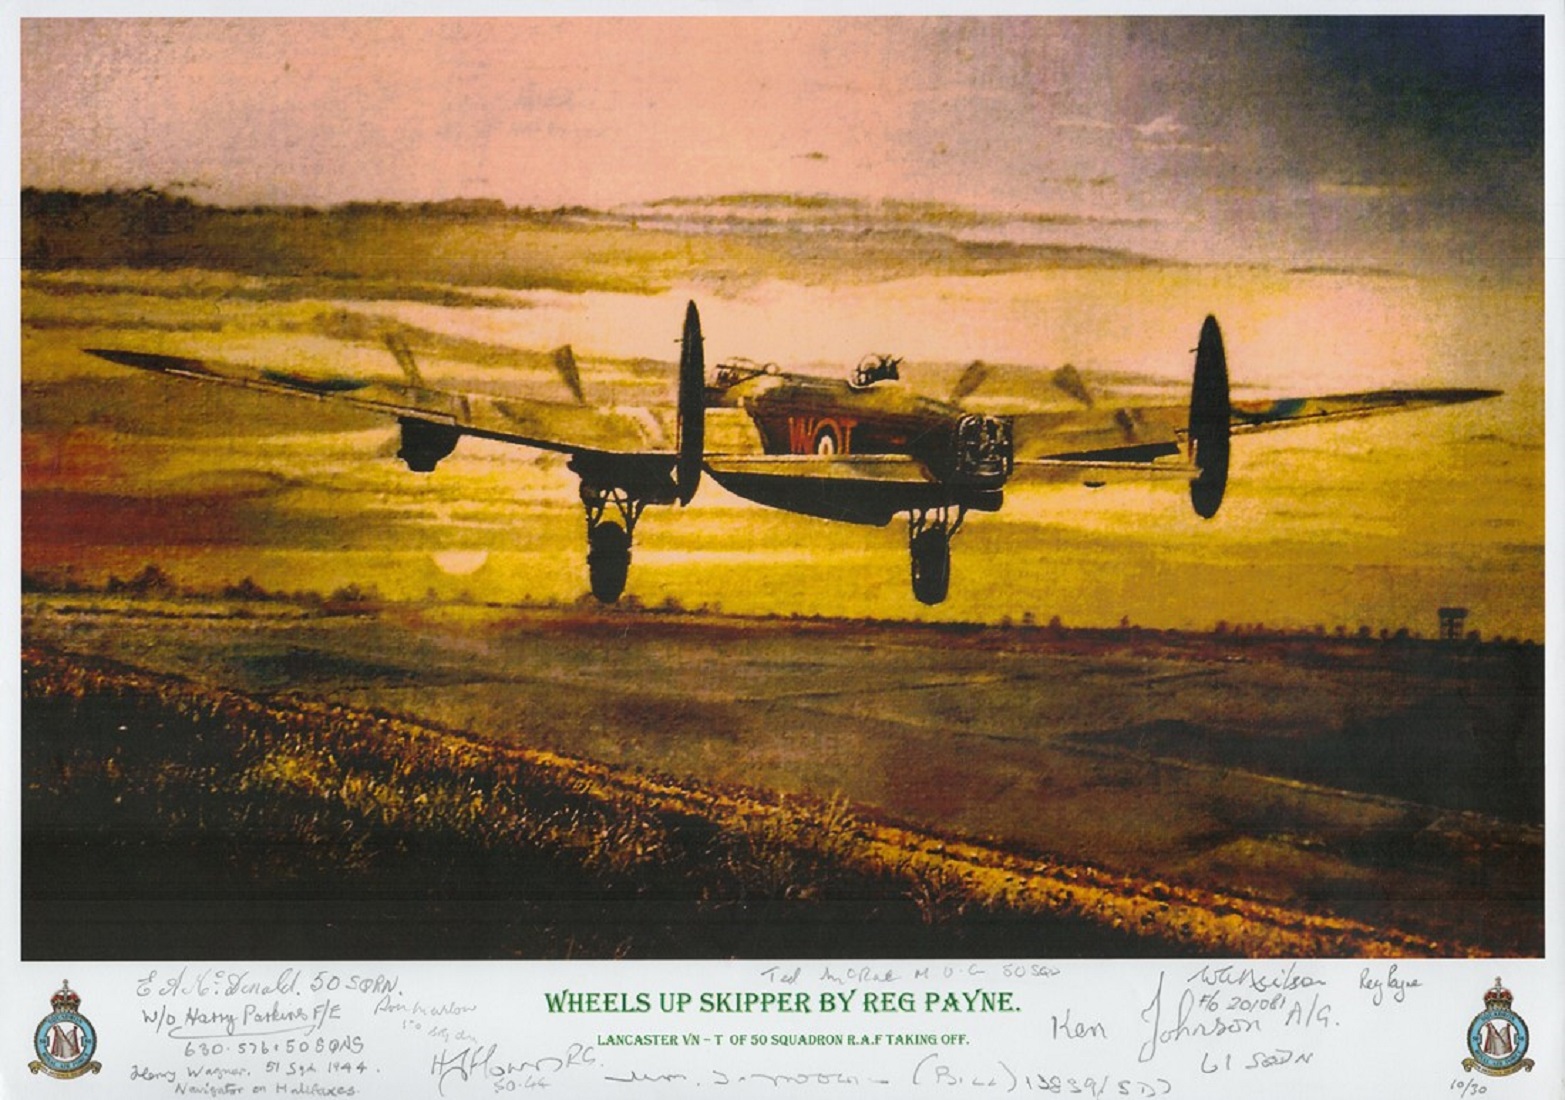 Wheels up skipper print by Reg Payne signed by 9 including Donald, Parkins, Wagner, Flowers,